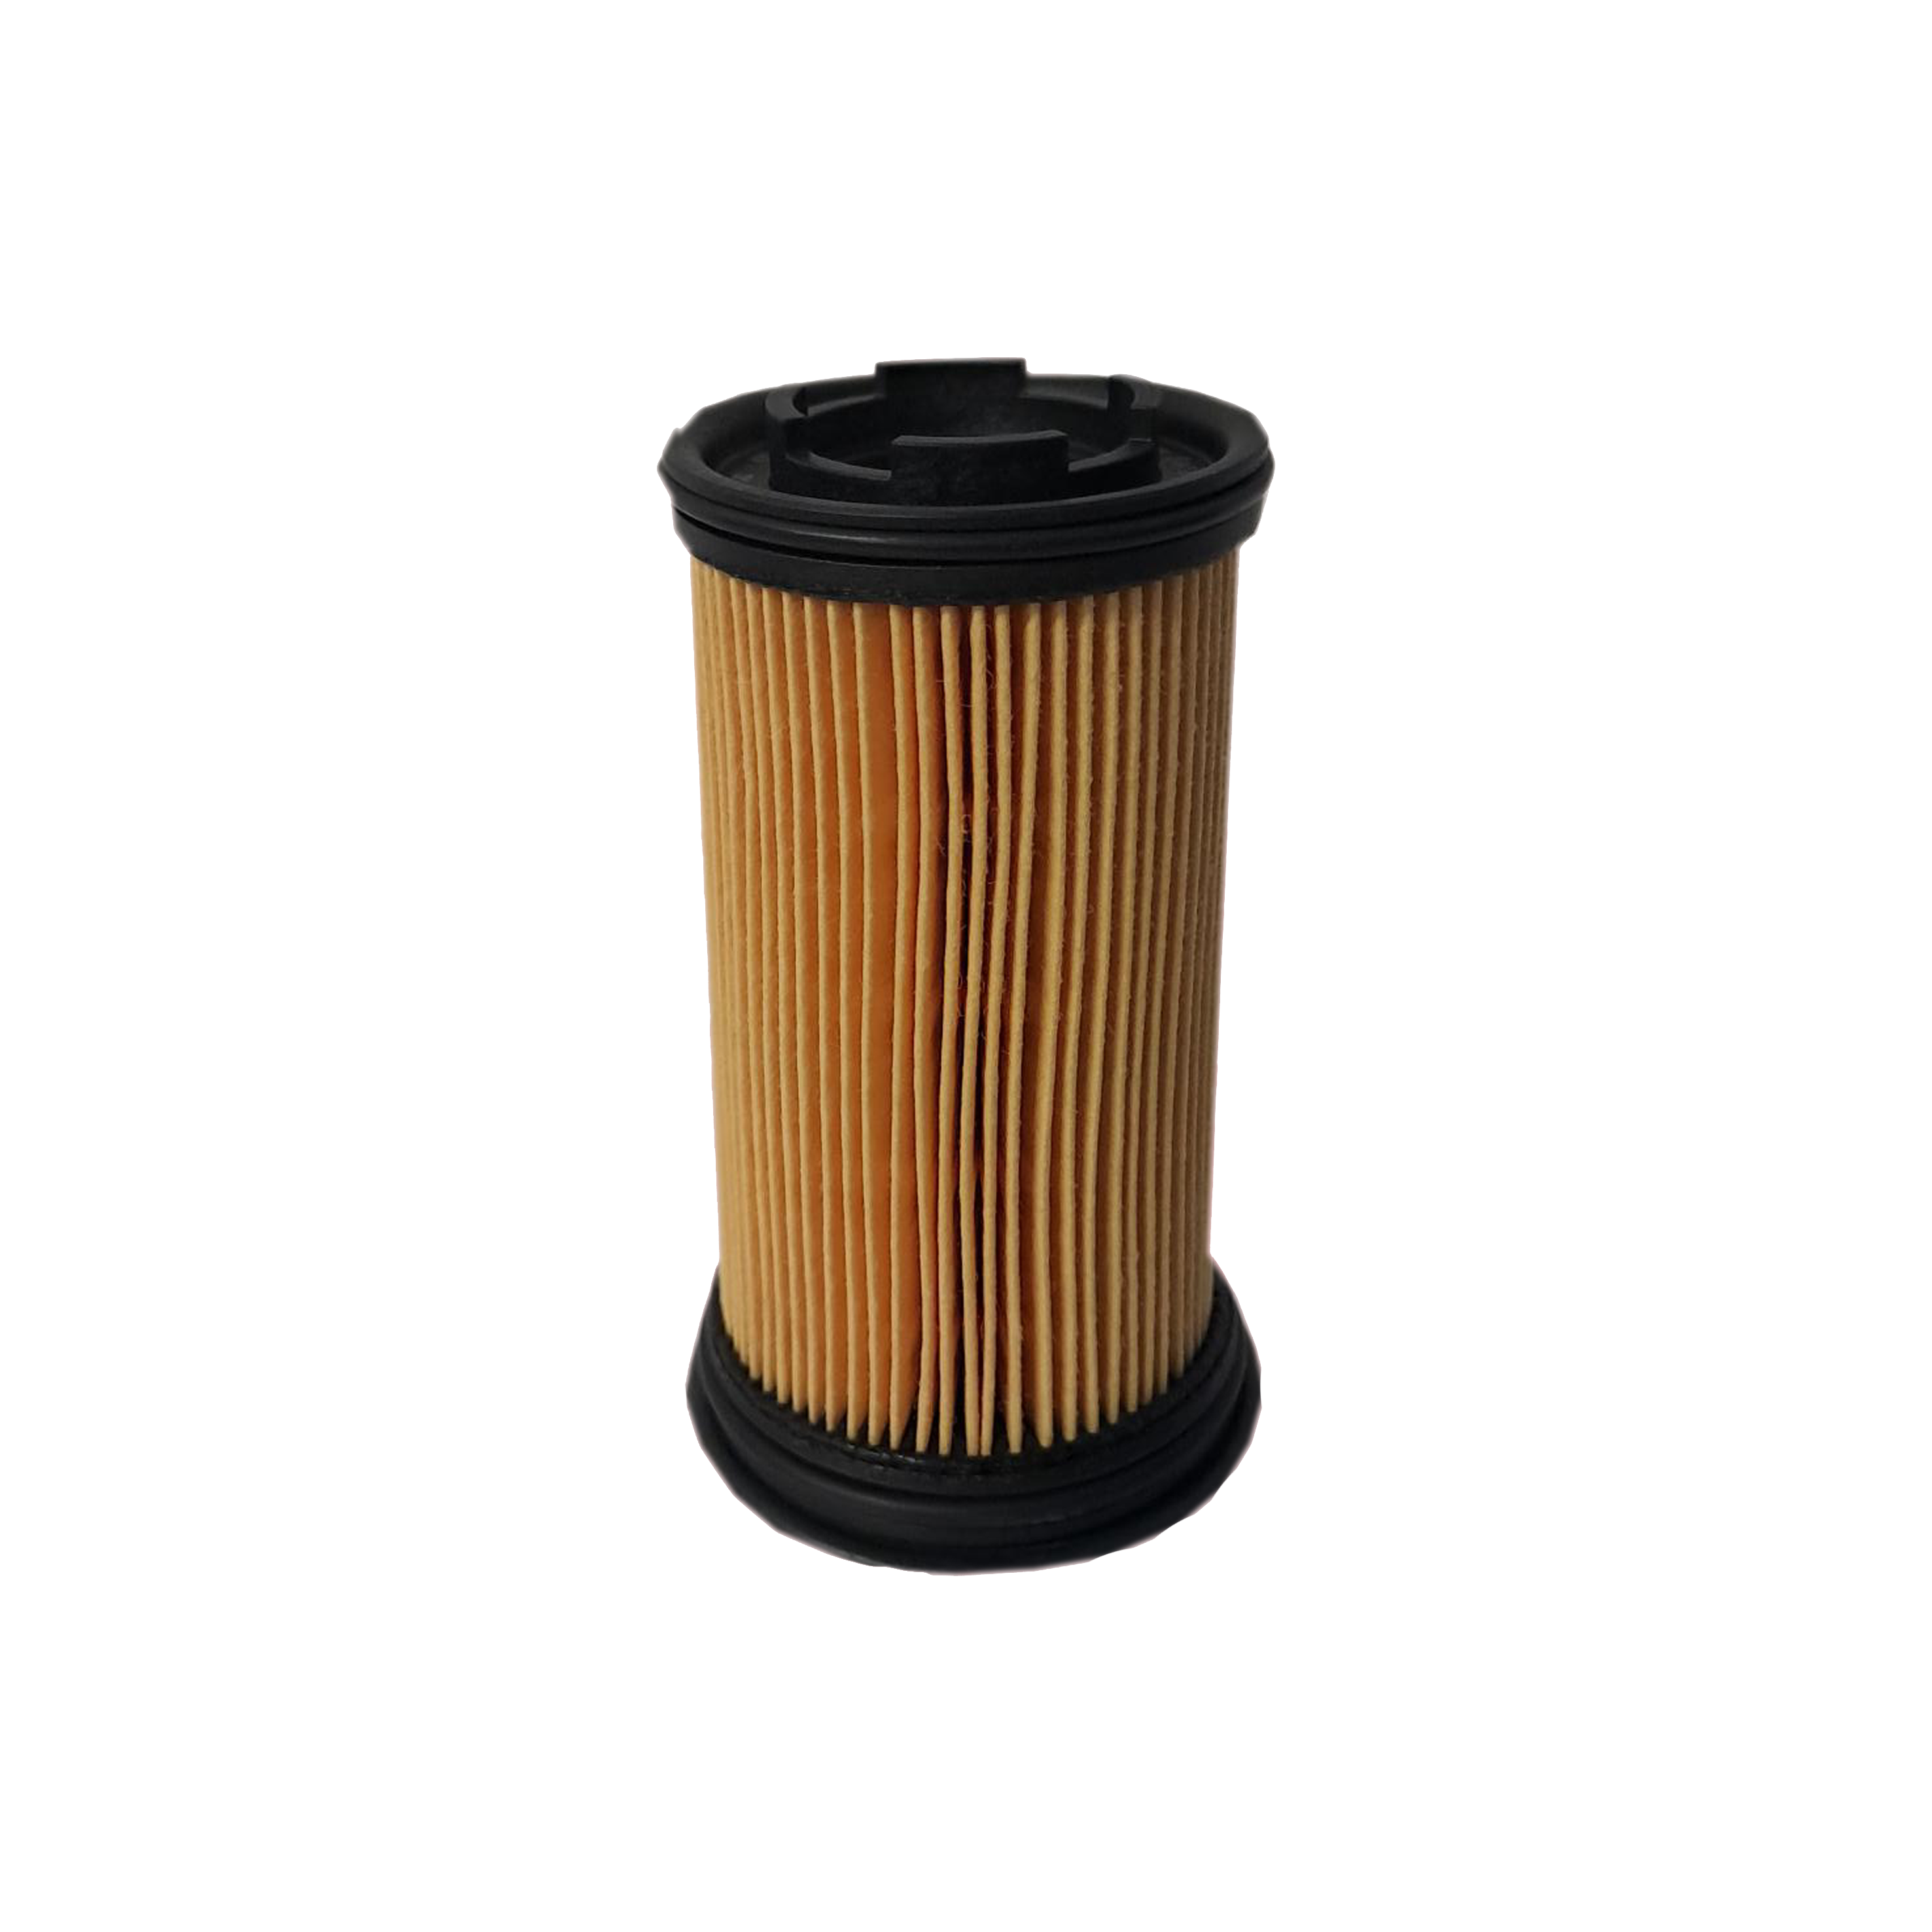 Ad-Blue Pump Filter for 350MH / 270MH / 250MH / 200MH / 180MH / 160MH / 140W